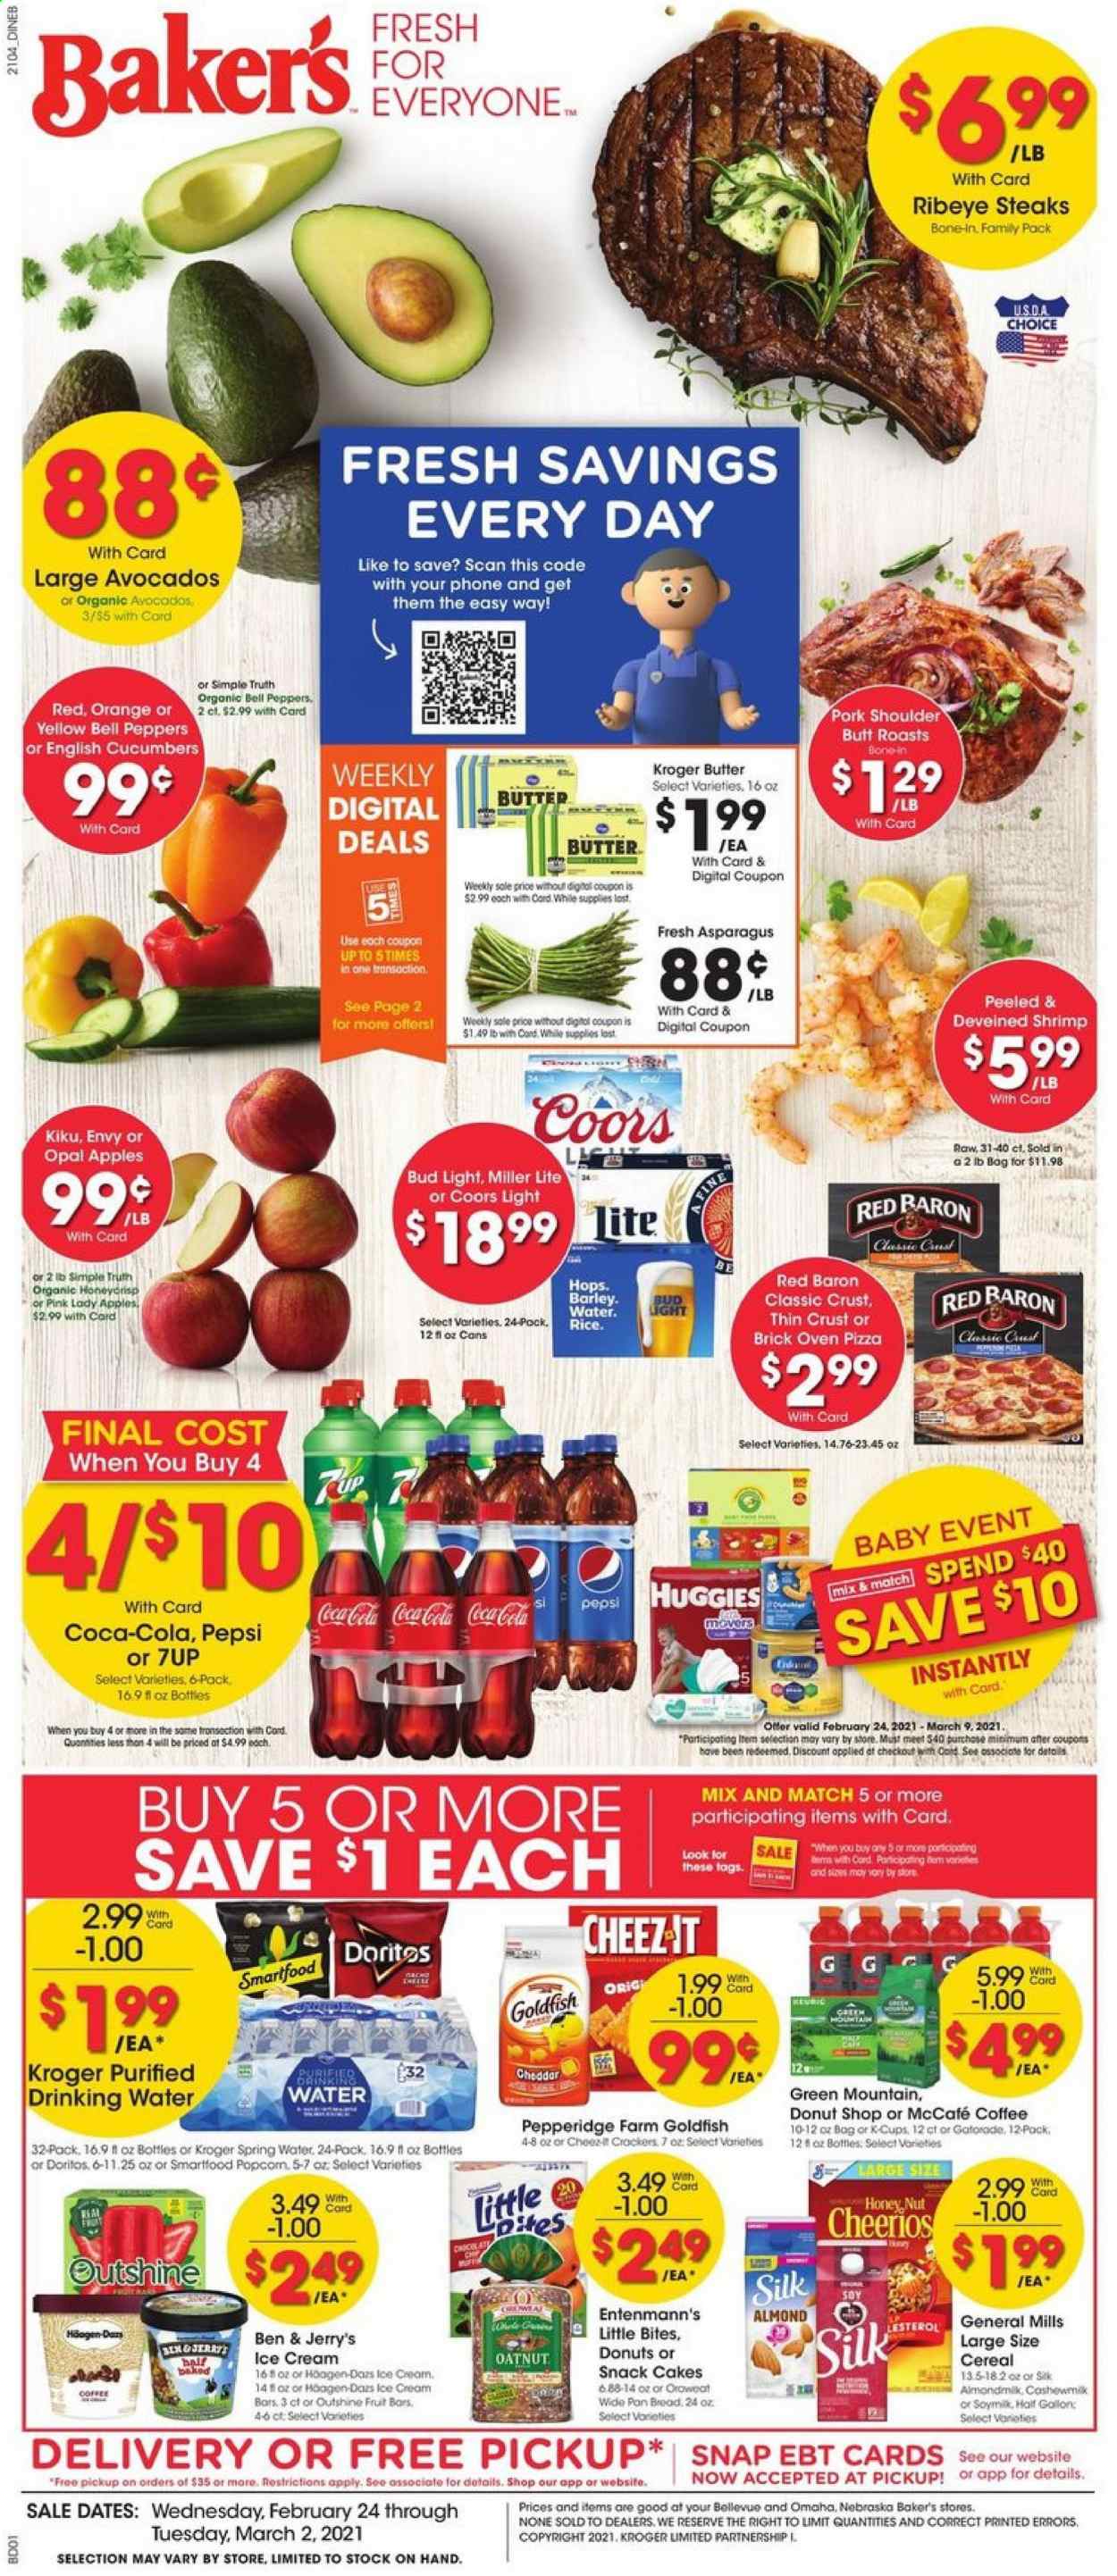 thumbnail - Baker's Flyer - 02/24/2021 - 03/02/2021 - Sales products - cake, Entenmann's, Little Bites, apples, oranges, shrimps, pizza, cheddar, soy milk, Silk, butter, ice cream, ice cream bars, Ben & Jerry's, bell peppers, Red Baron, Doritos, snack, Smartfood, Goldfish, cucumber, cereals, Cheerios, almonds, Coca-Cola, Pepsi, 7UP, Gatorade, spring water, coffee, coffee capsules, McCafe, K-Cups, Green Mountain, beer, Miller Lite, Coors, Bud Light, beef meat, steak, ribeye steak, pork meat, pork shoulder, Huggies, oven. Page 1.